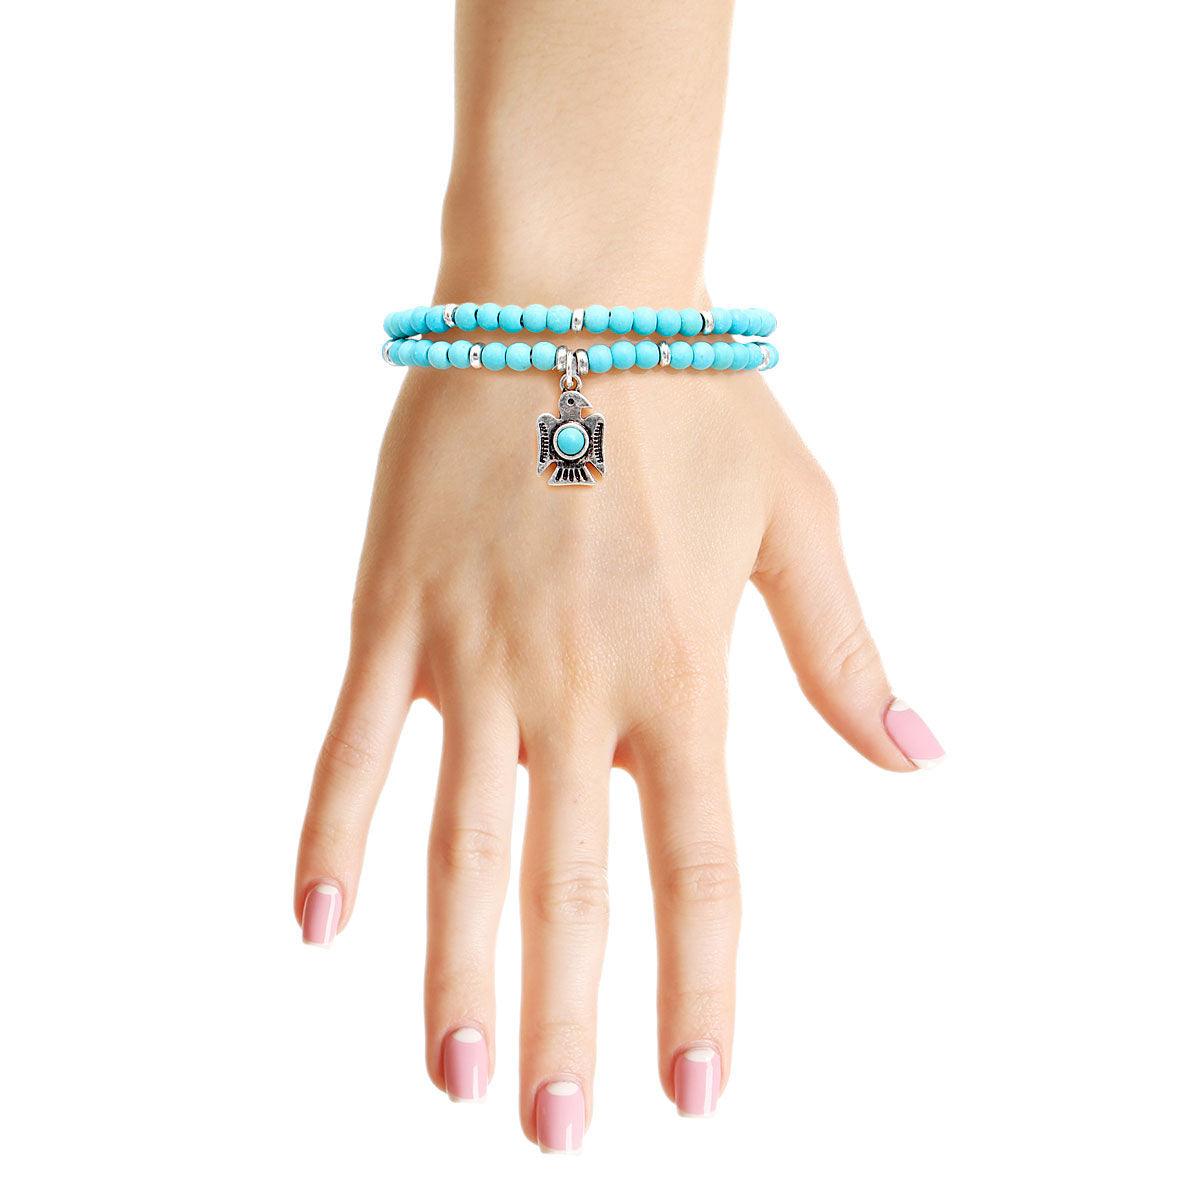 Beaded Wrap Bracelet in Turquoise Color with Charm Dangle